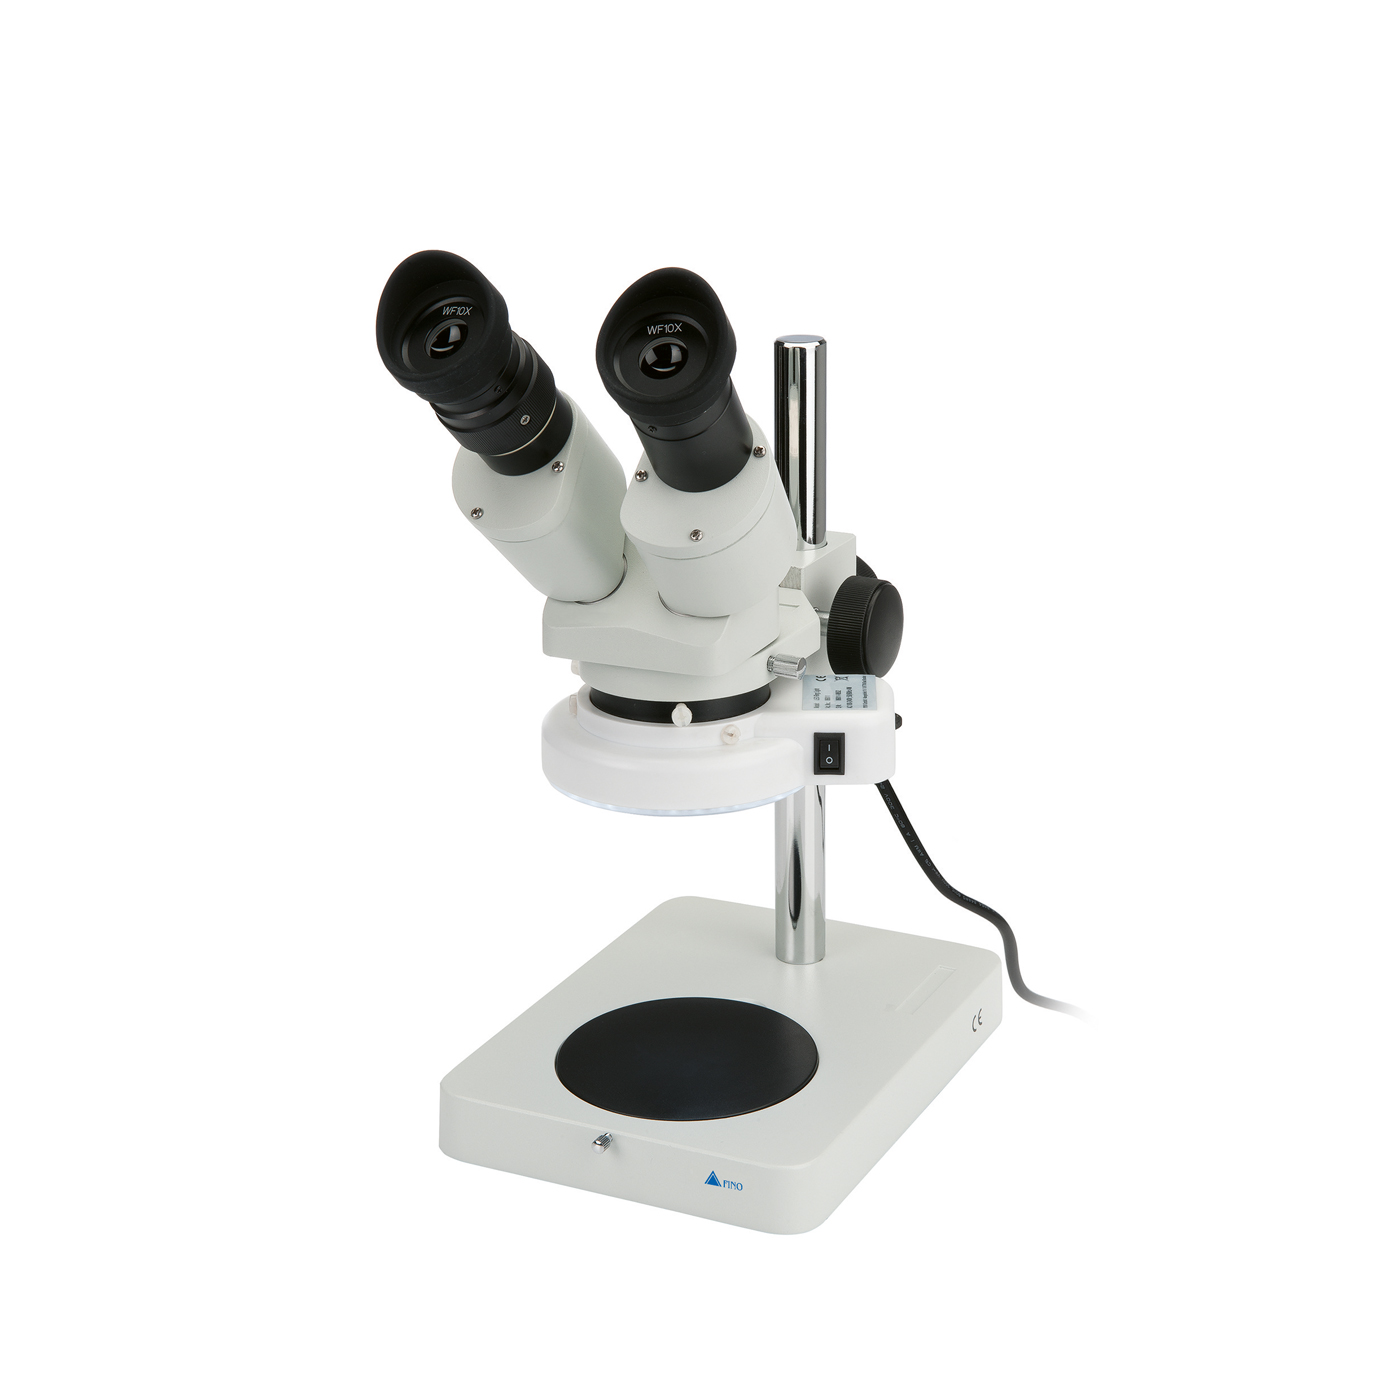 FINO Stereo Microscope with Stand - 1 piece